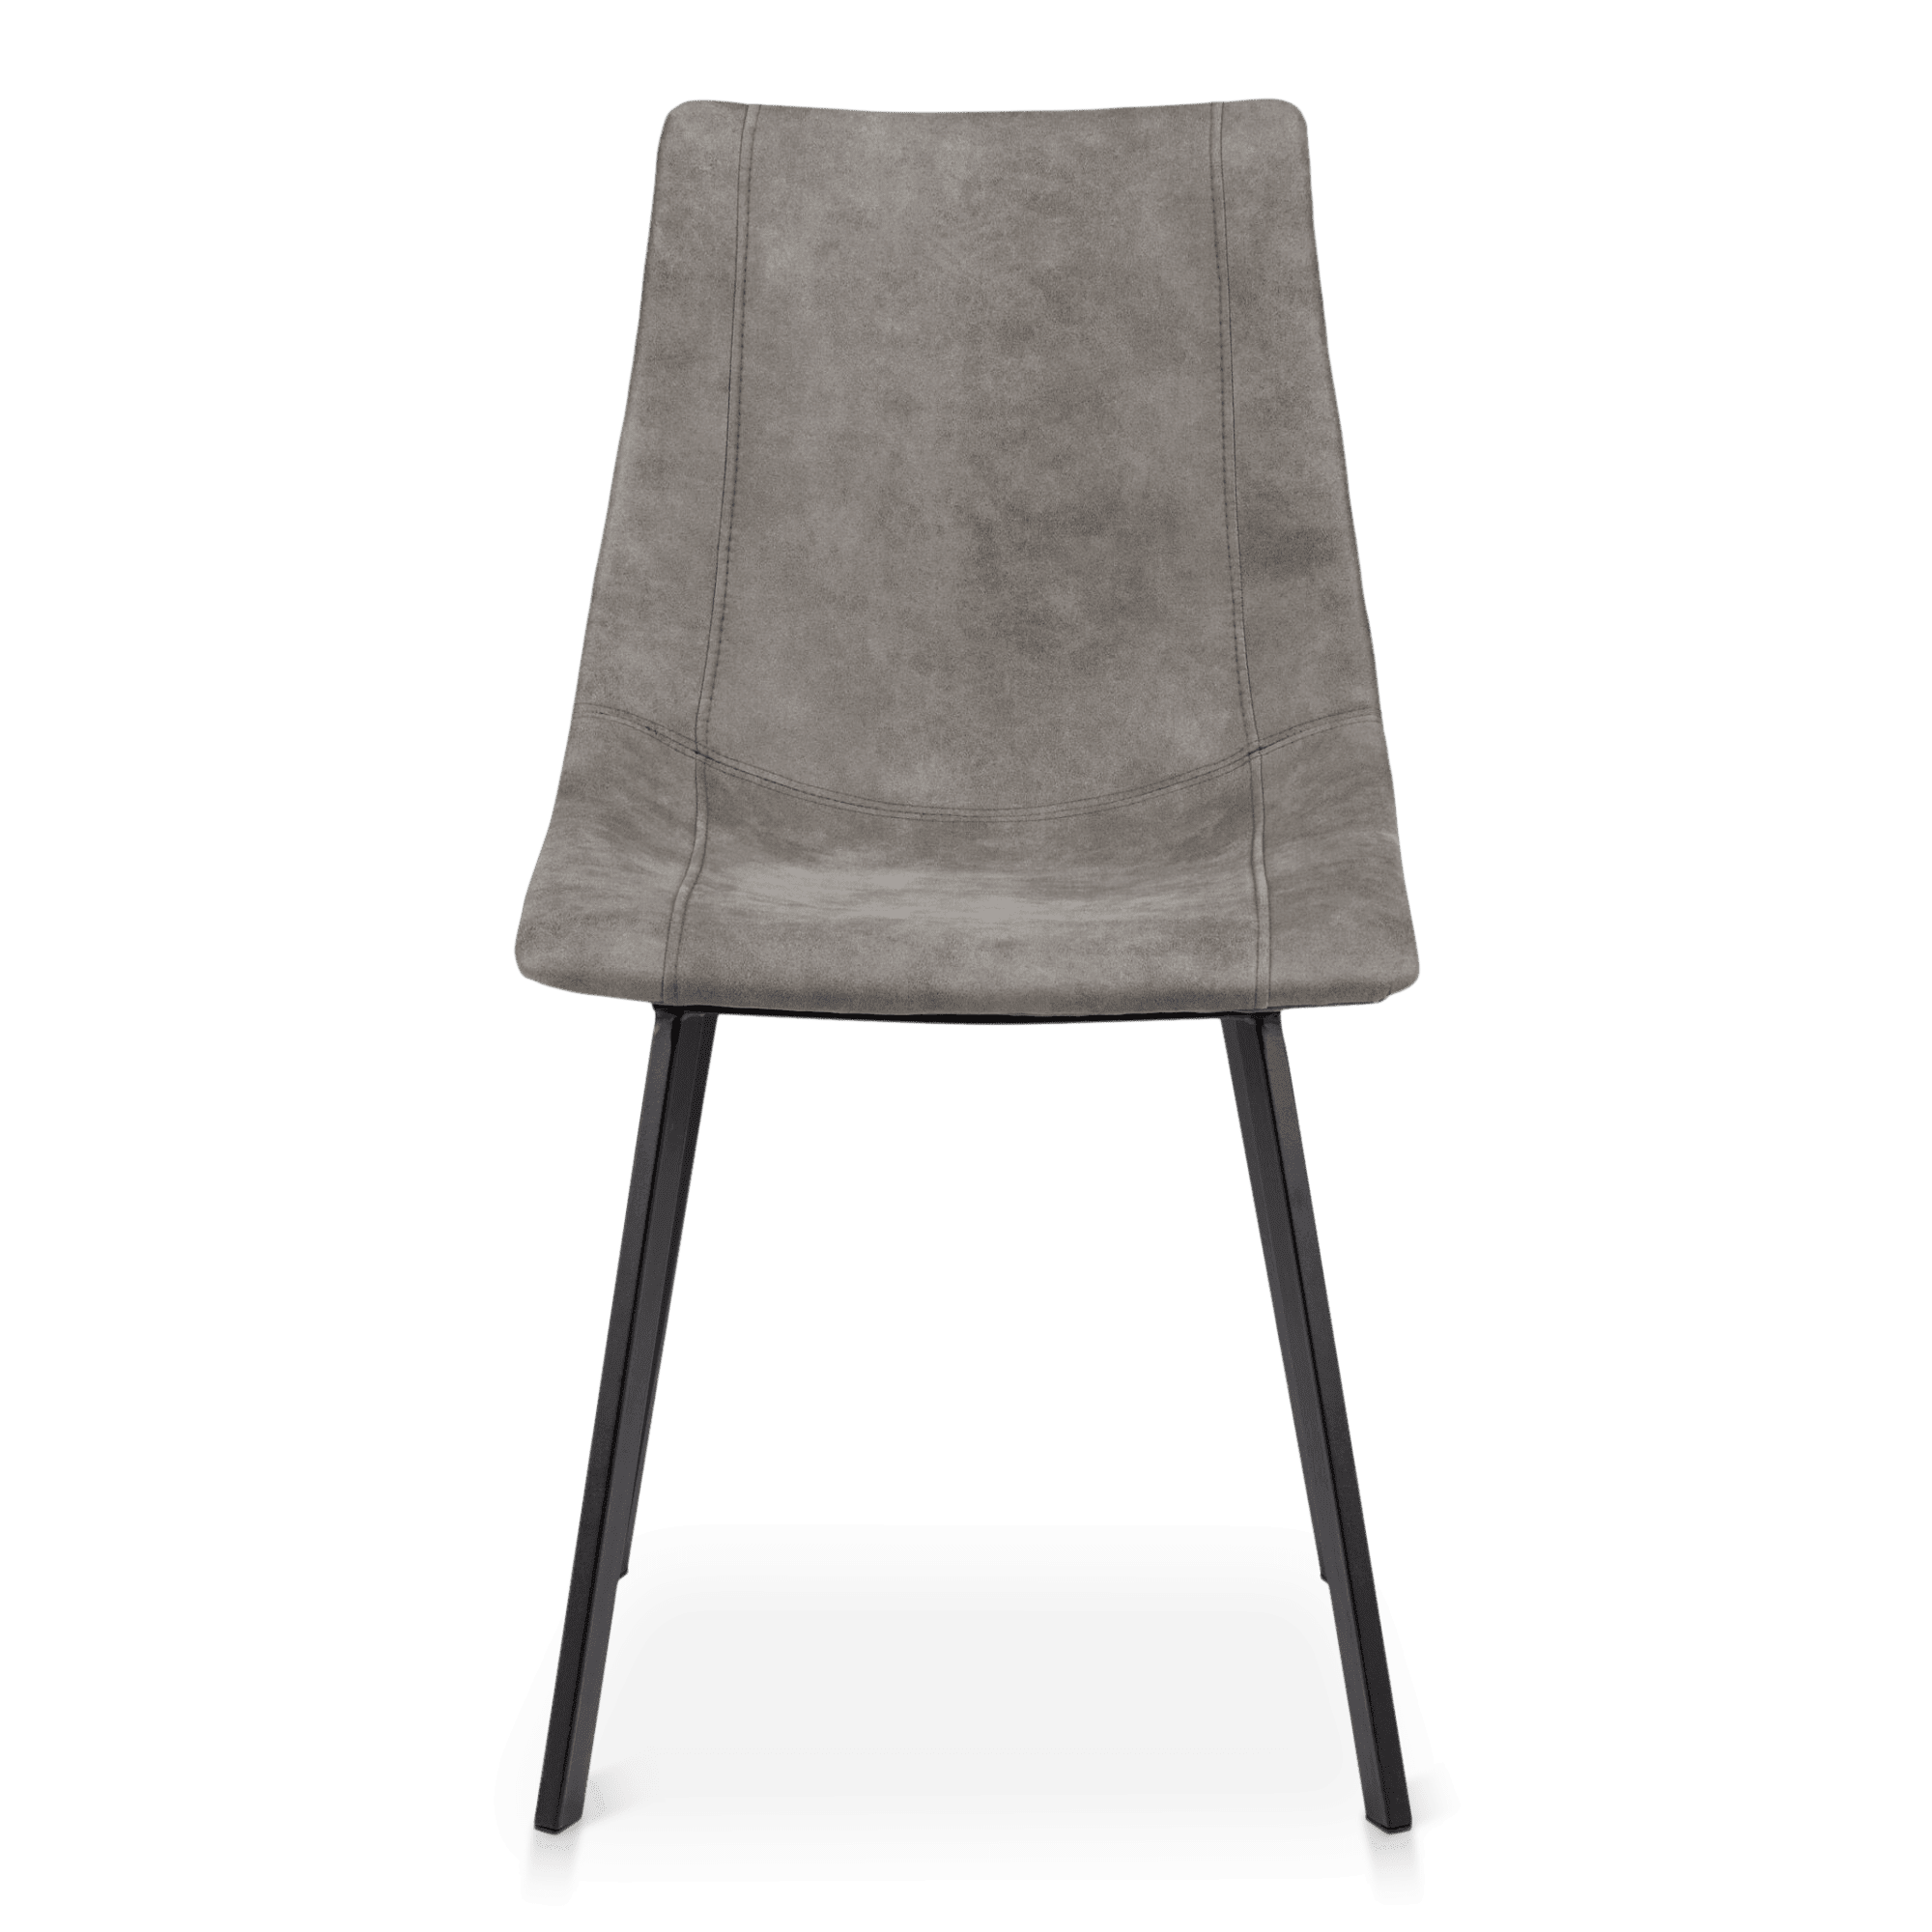 Textured Faux Leather and Metal Dining Chair